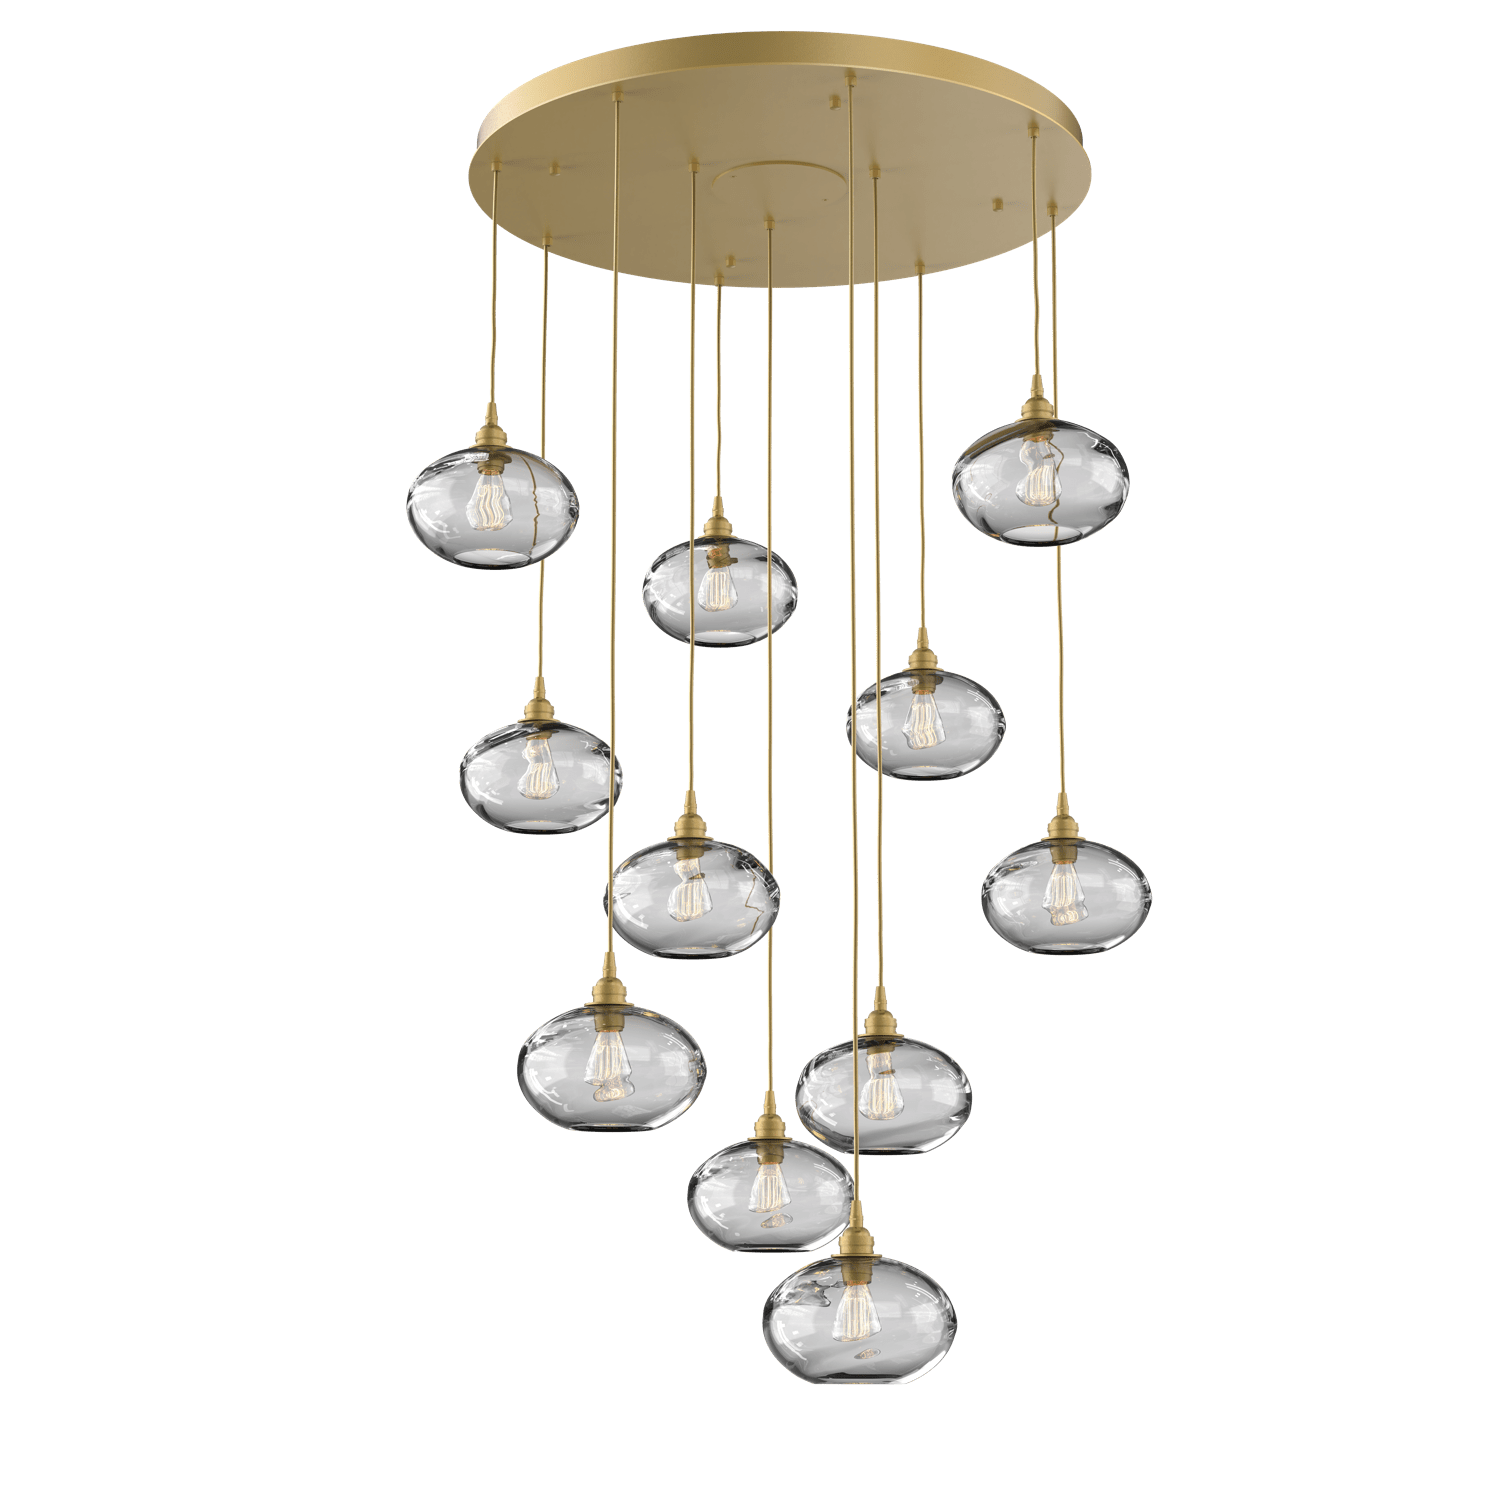 CHB0036-11-GB-OC-Hammerton-Studio-Optic-Blown-Glass-Coppa-11-light-round-pendant-chandelier-with-gilded-brass-finish-and-optic-clear-blown-glass-shades-and-incandescent-lamping